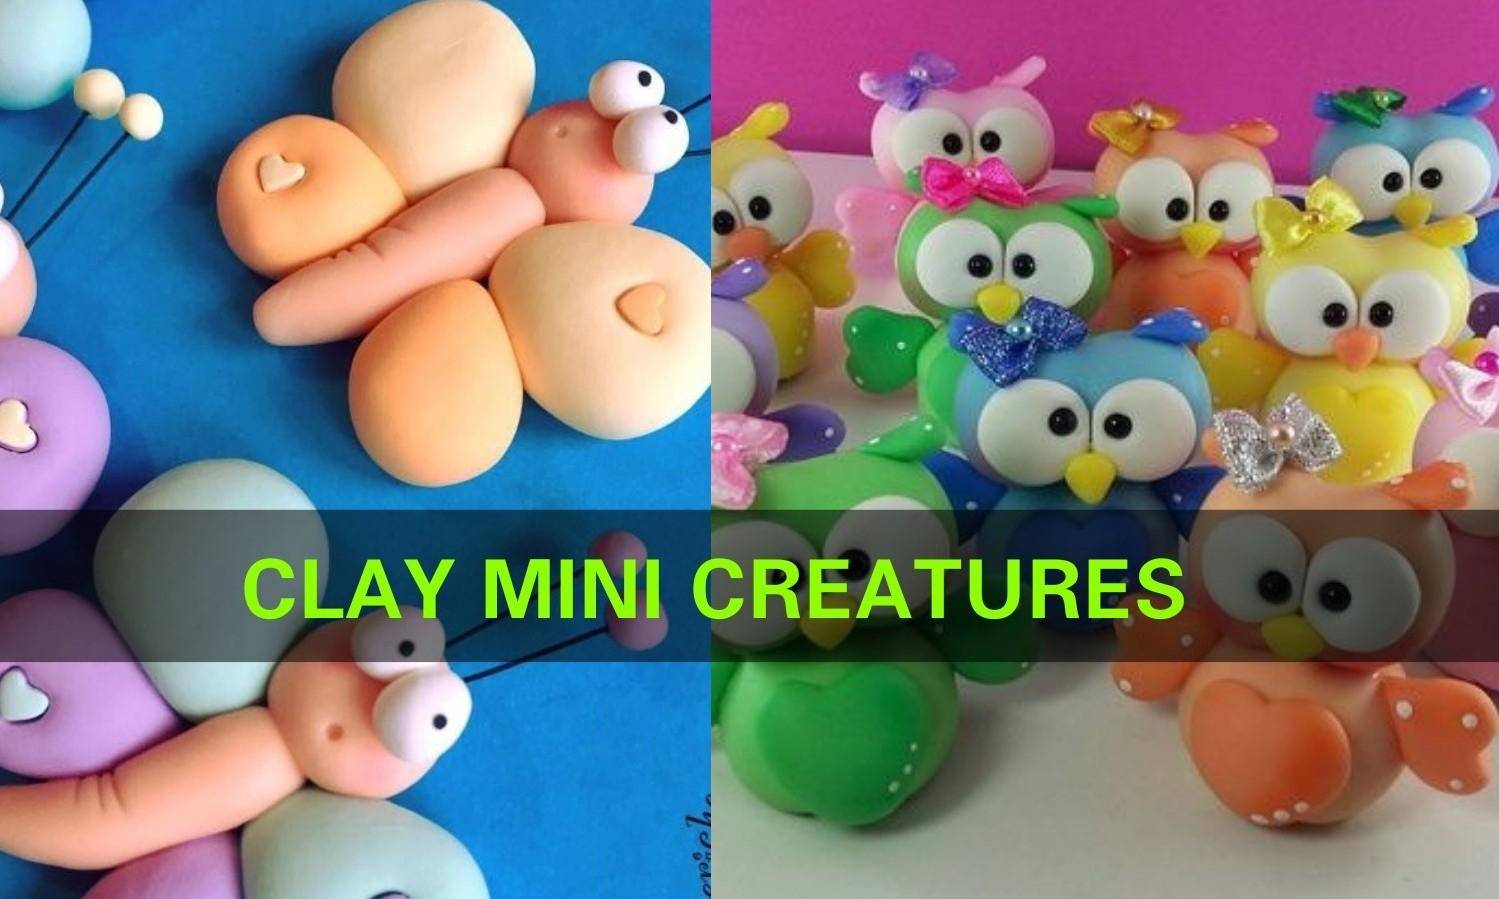 Clay Mini Creatures- Kids workshop by The Living Walls